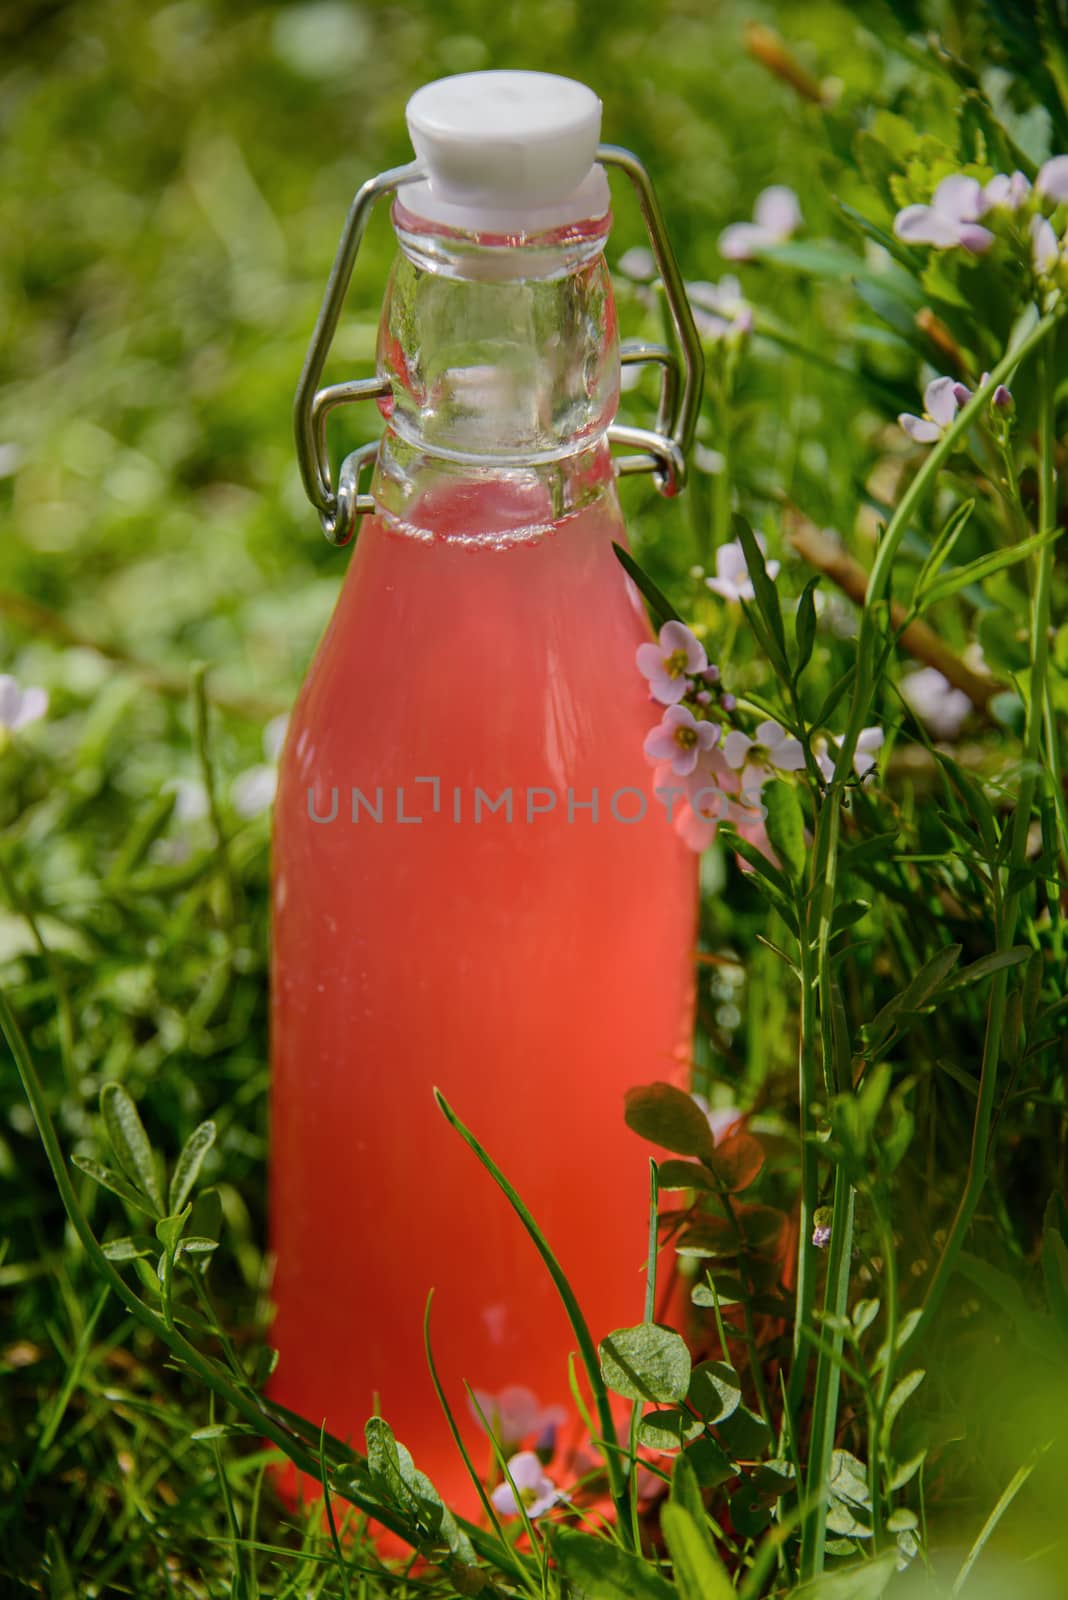 A bottle with rhubarb juice